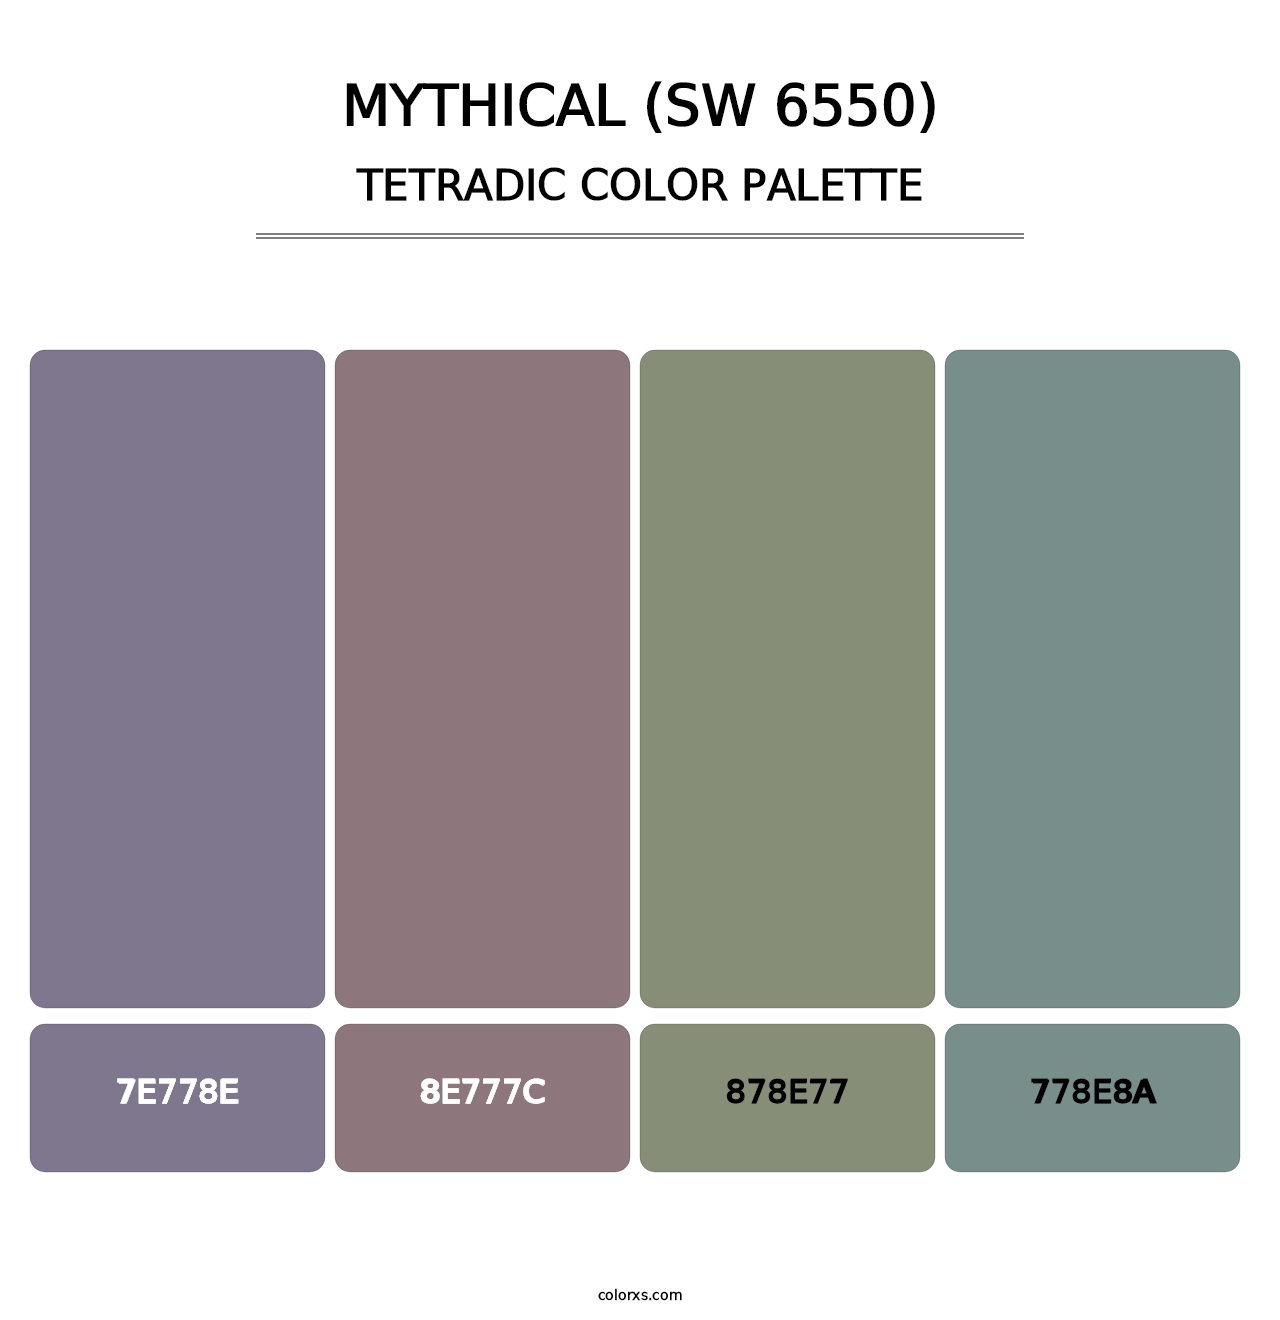 Mythical (SW 6550) - Tetradic Color Palette